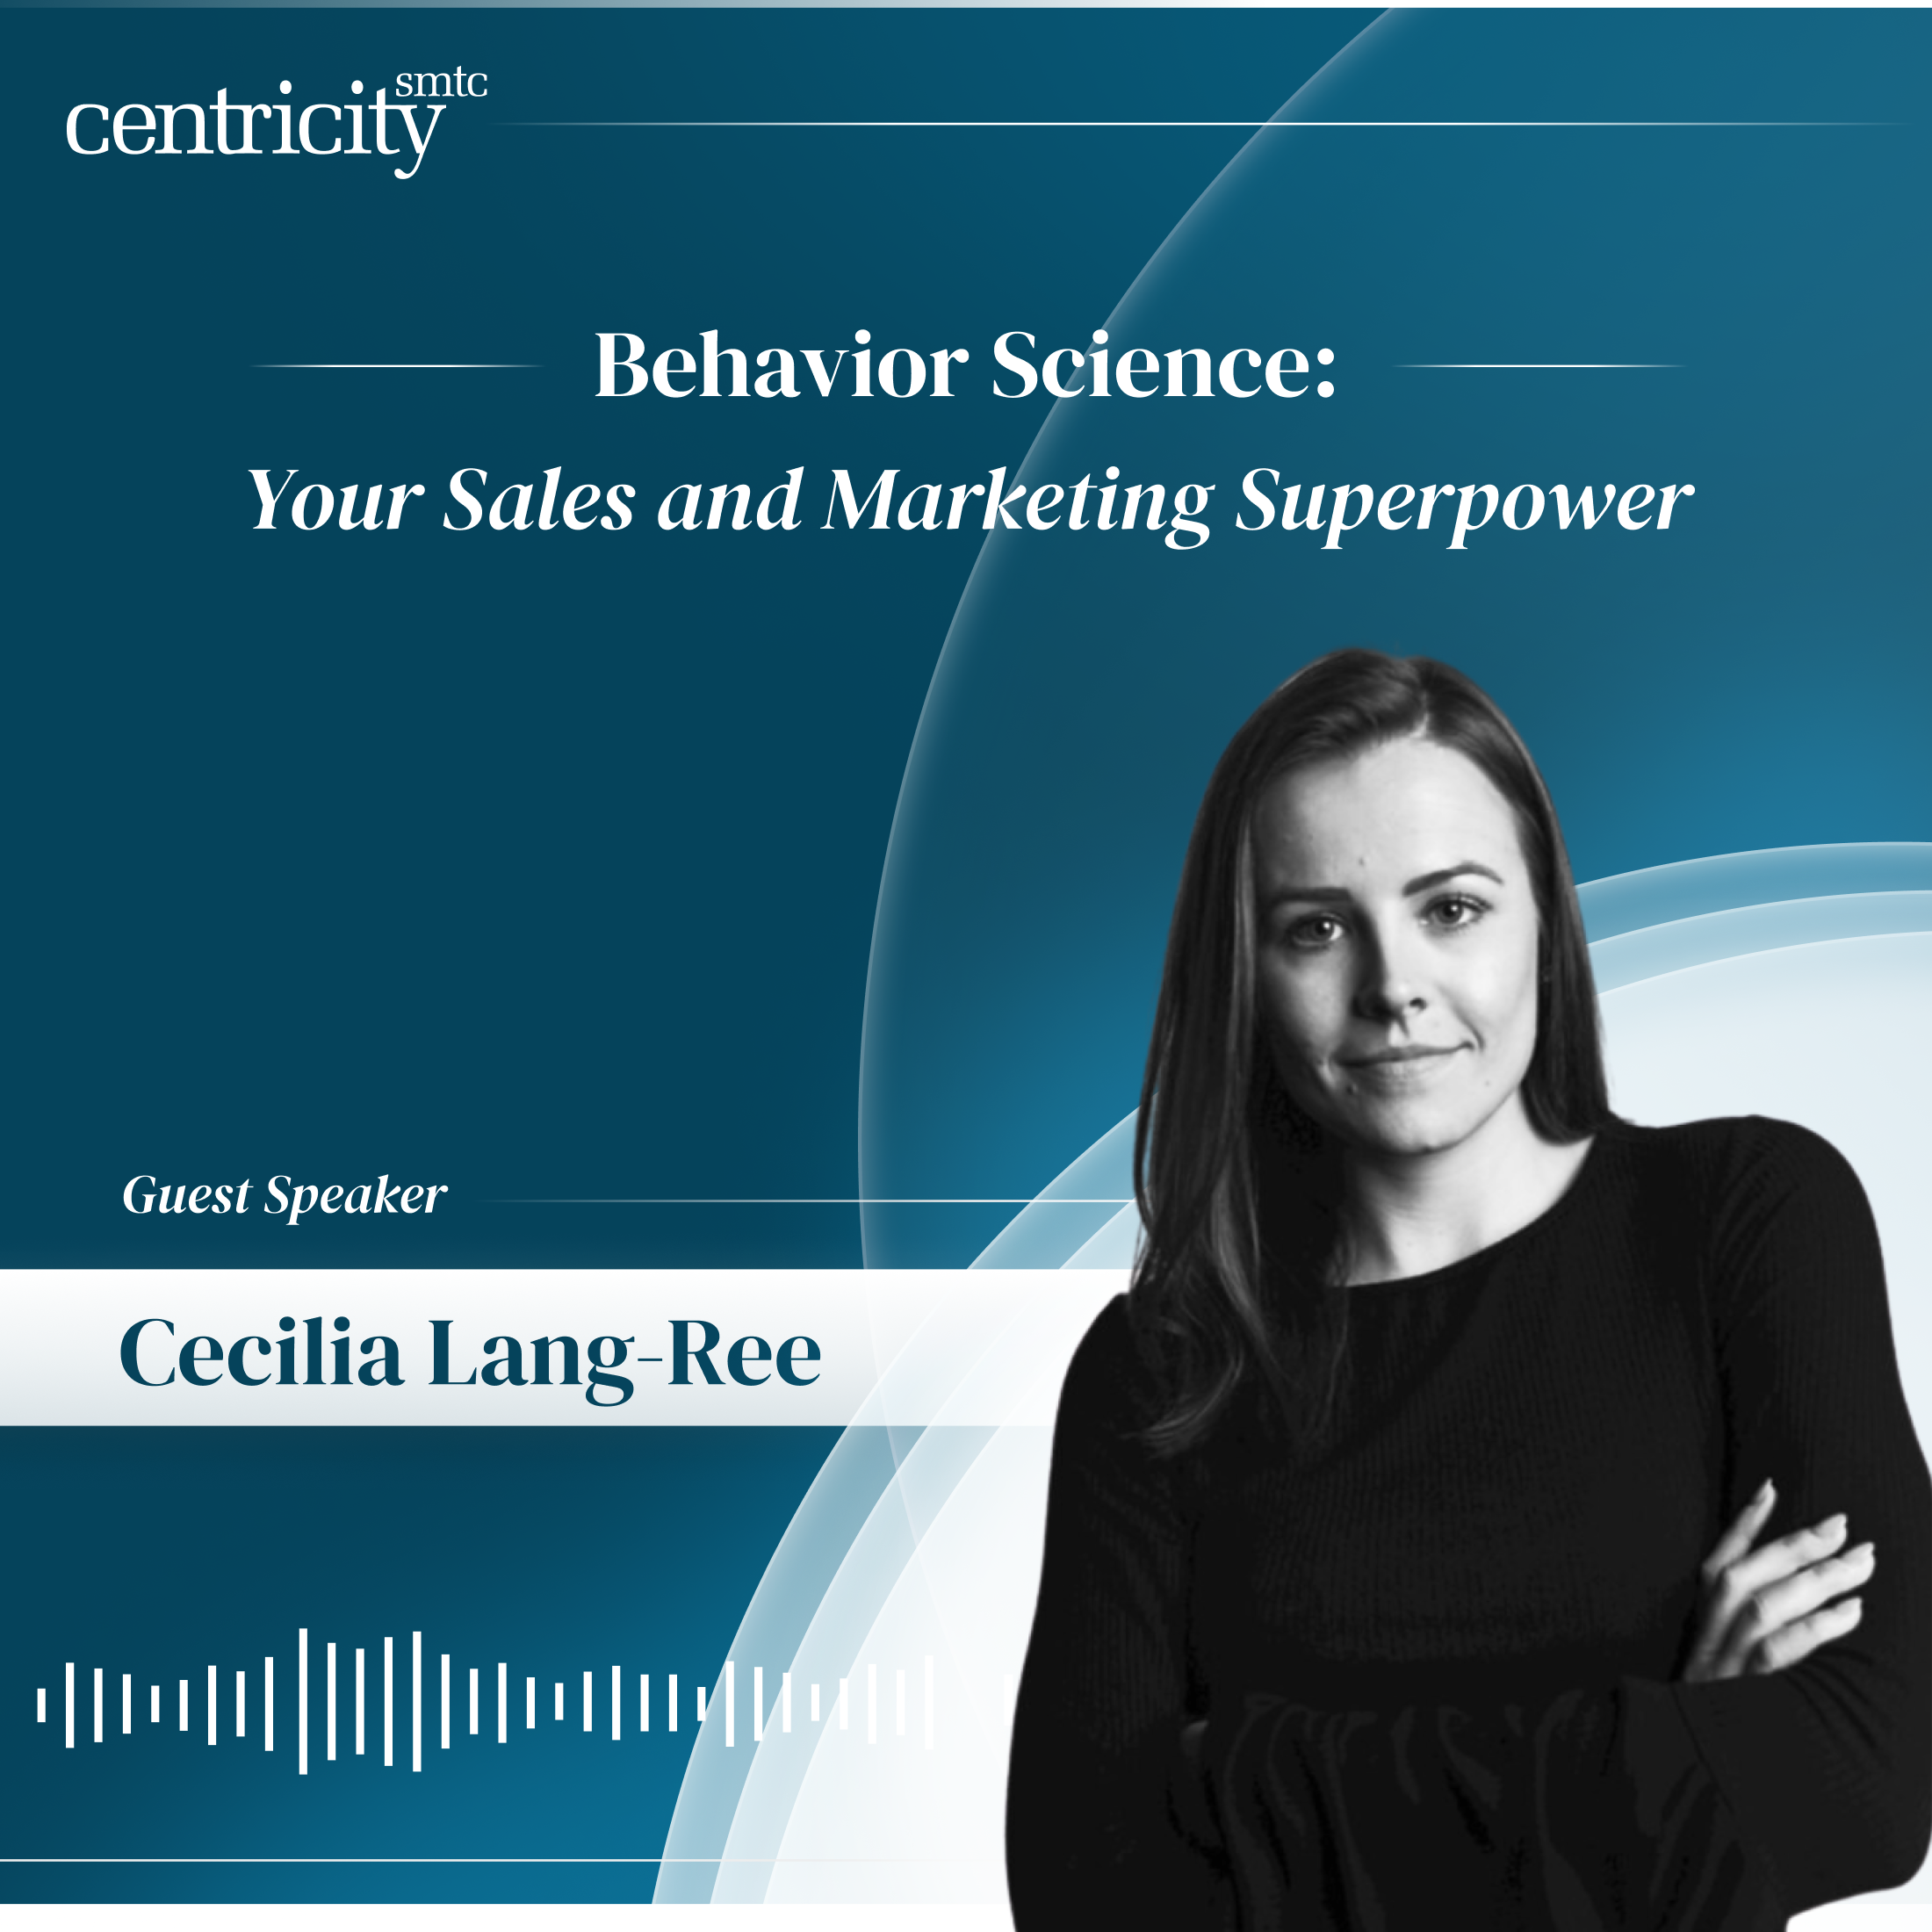 Behavior Science: Your Sales and Marketing Superpower